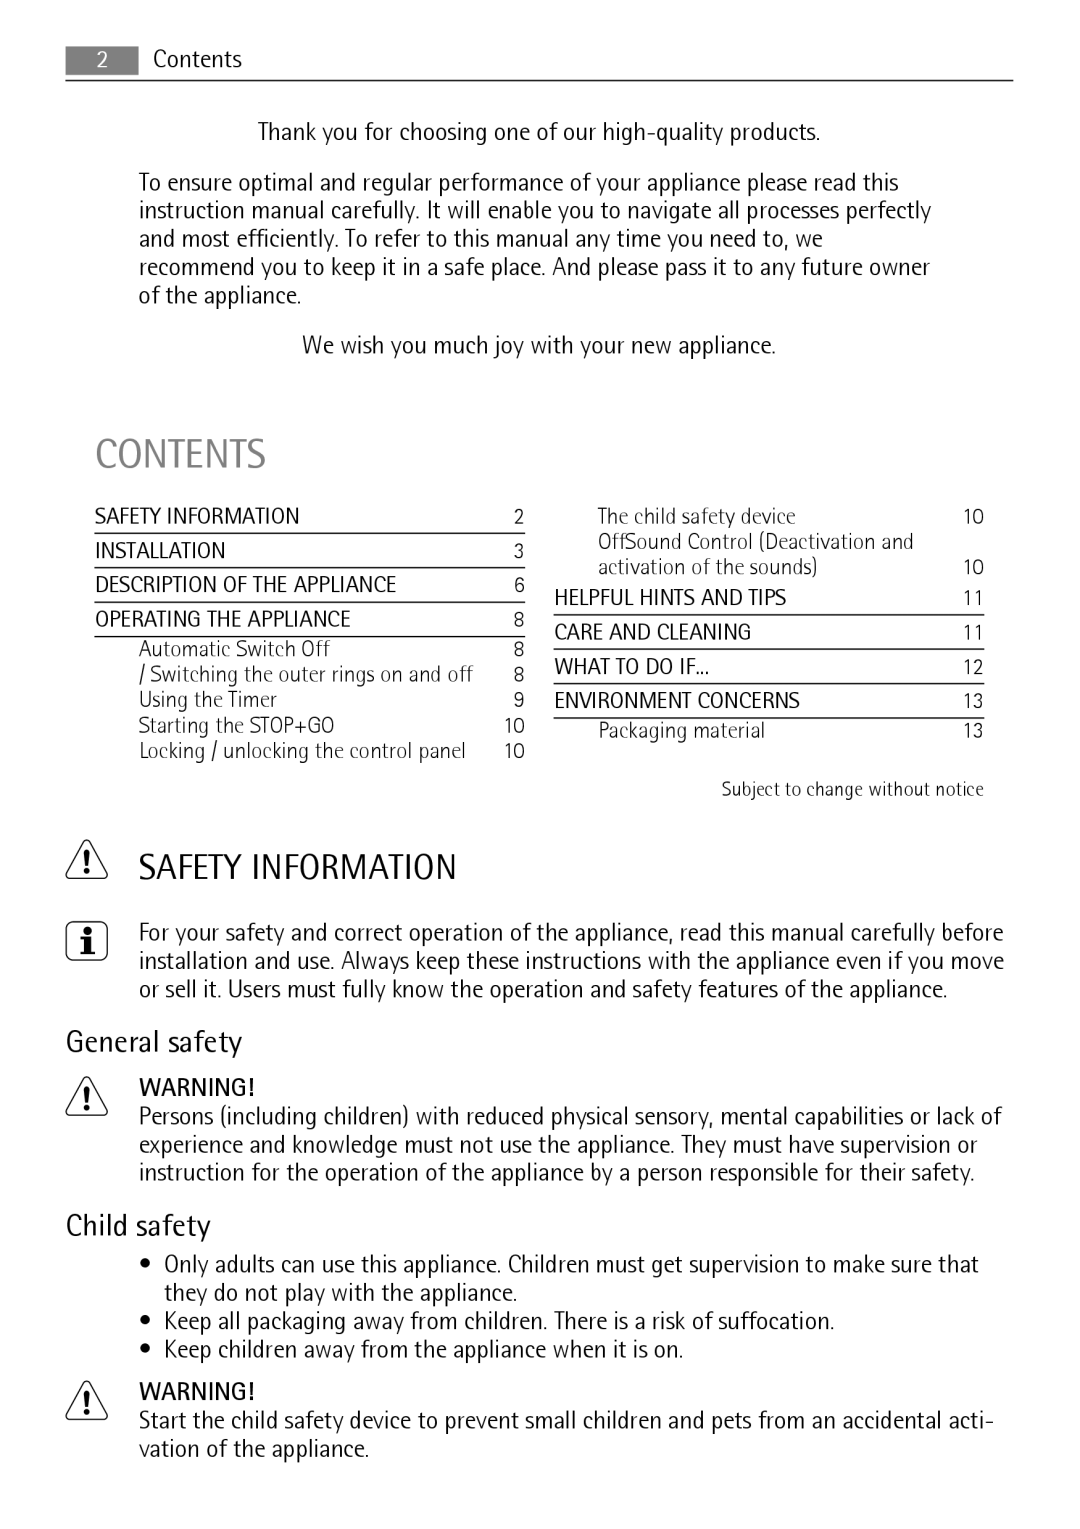 AEG HM834080F-B user manual Safety Information, General safety, Child safety, Contents 